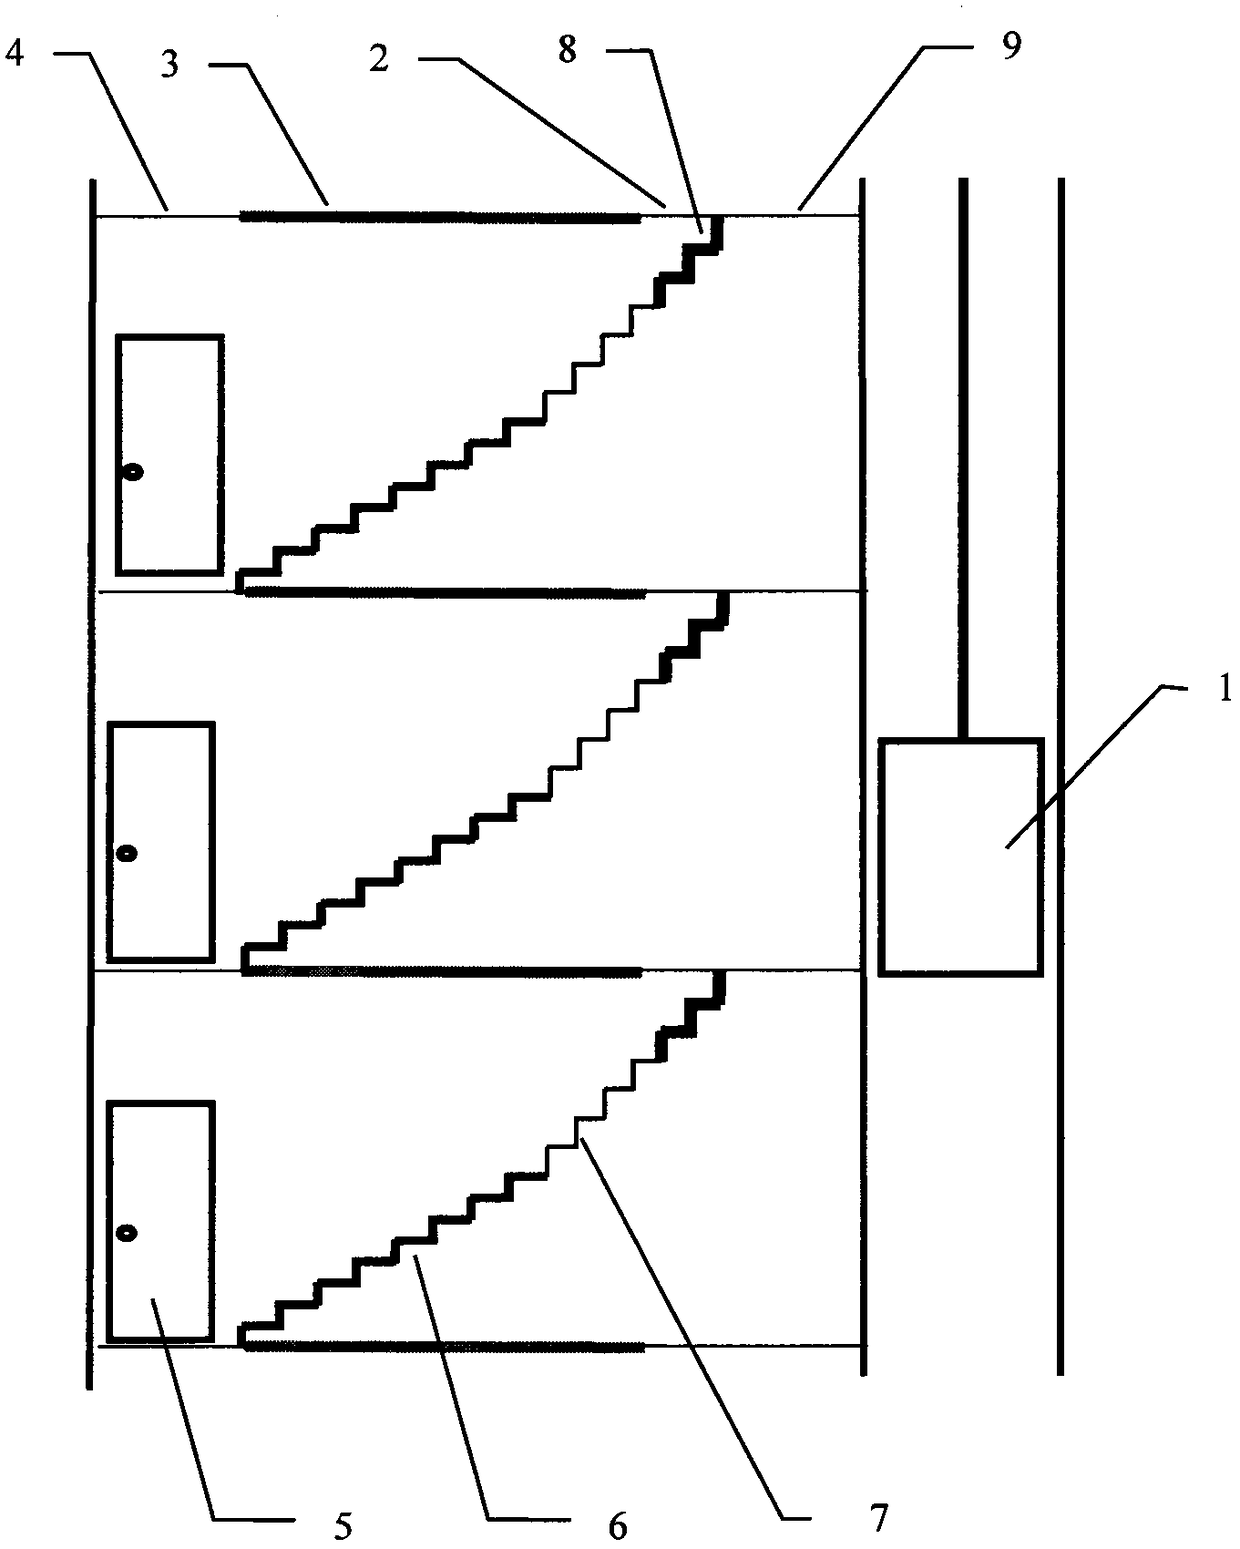 Additionally-mounted elevator with characteristic of direct arrival to original residence gate under condition of steep stairs